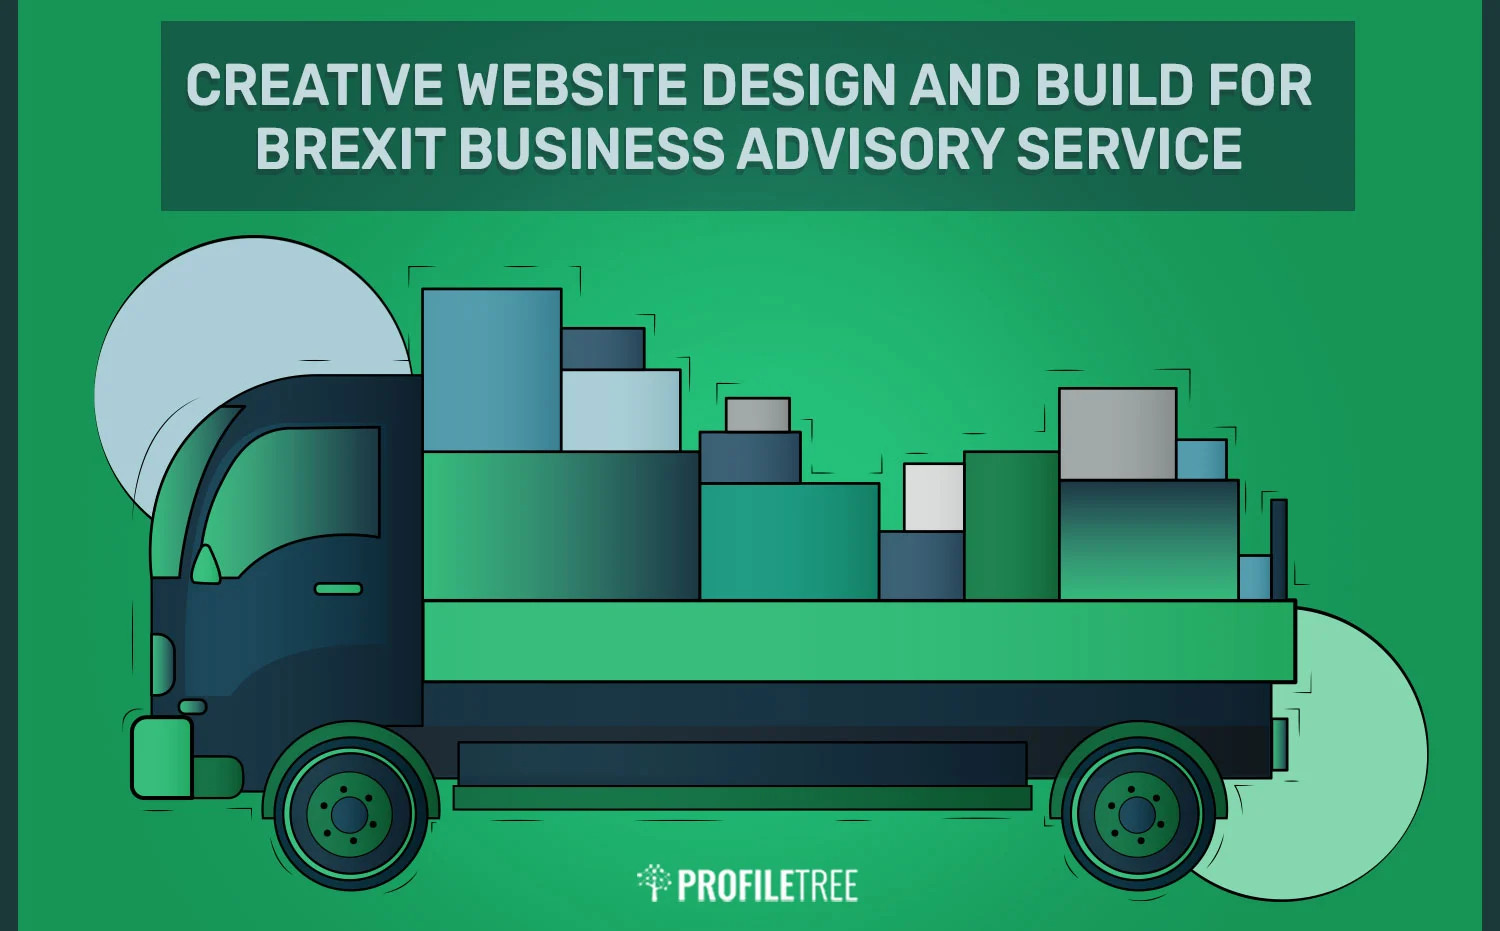 Creative Website Design and Build for Brexit Business Advisory Service